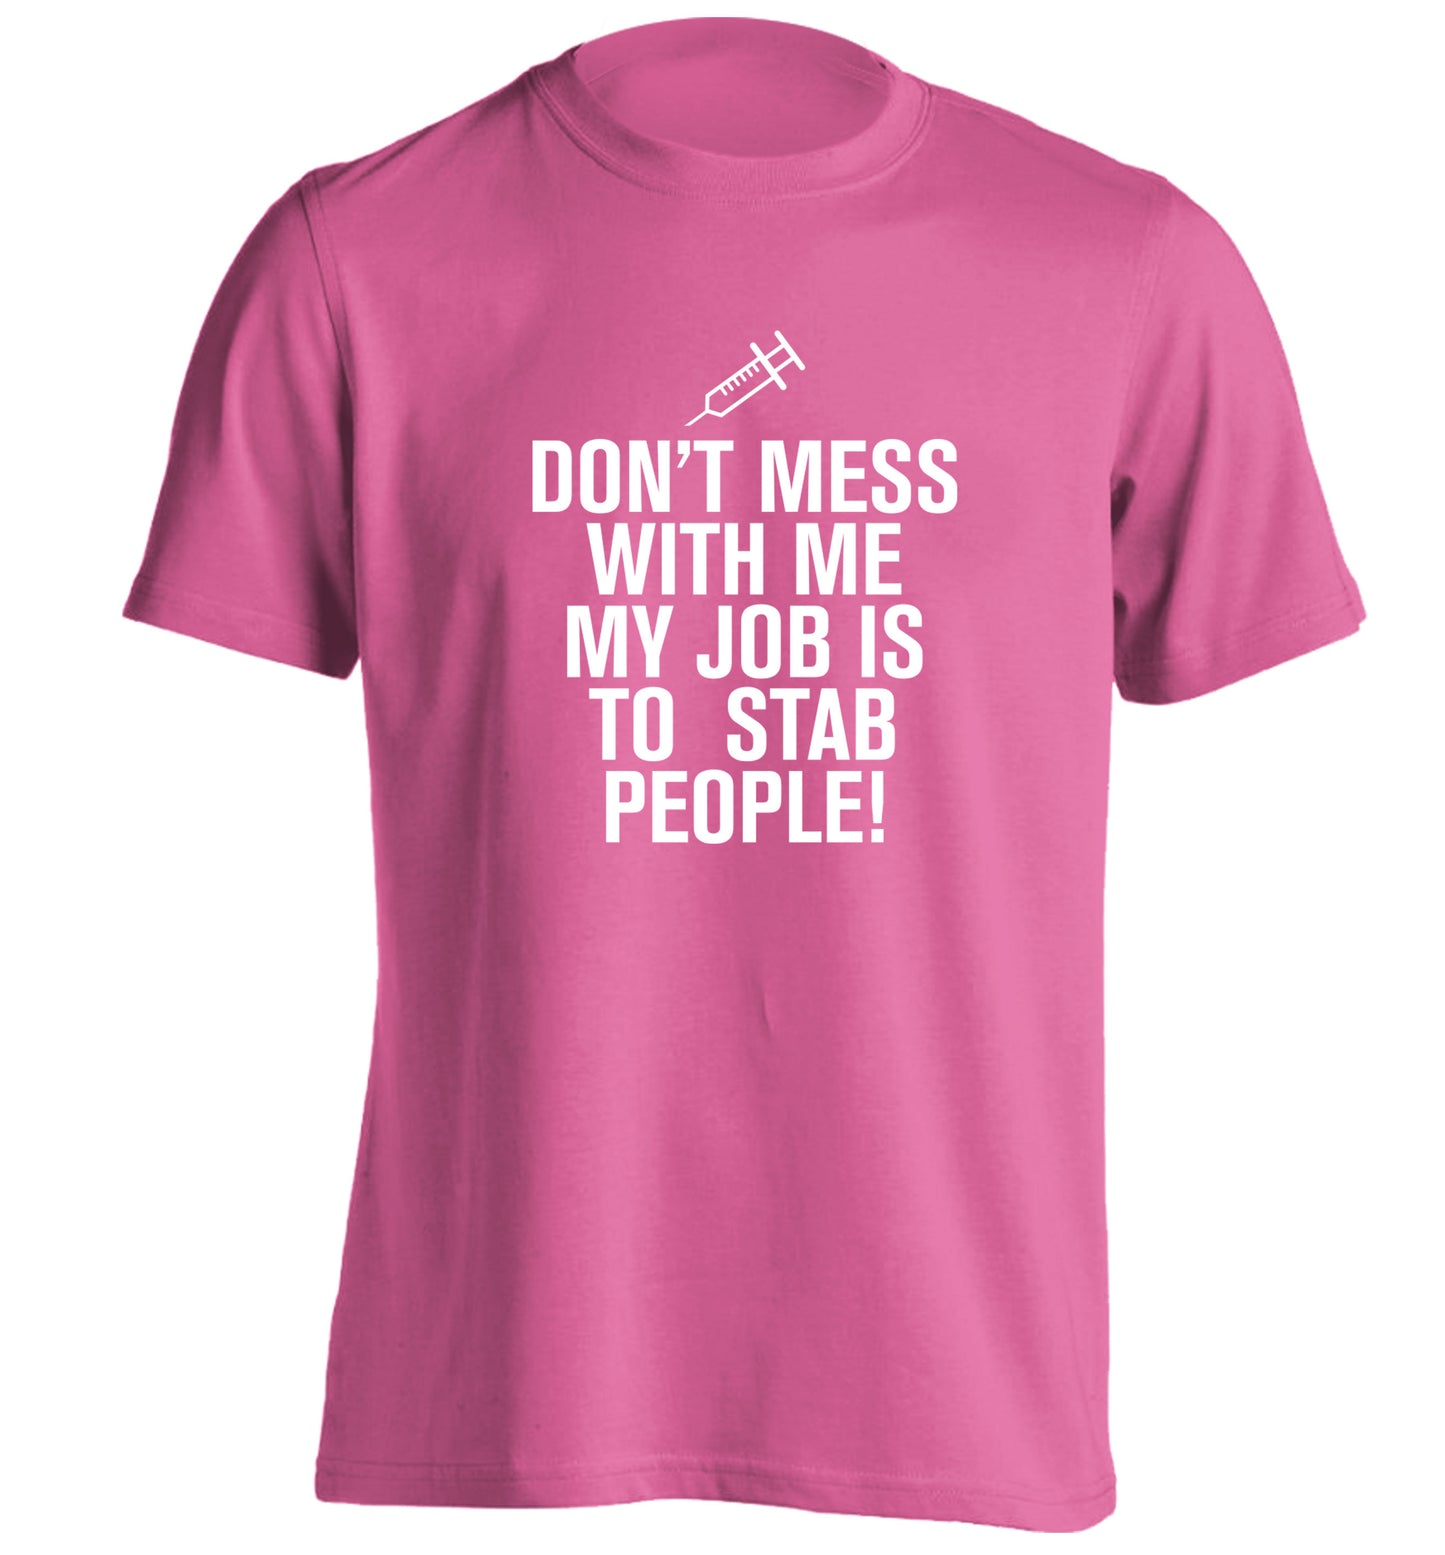 Don't mess with me my job is to stab people! adults unisex pink Tshirt 2XL